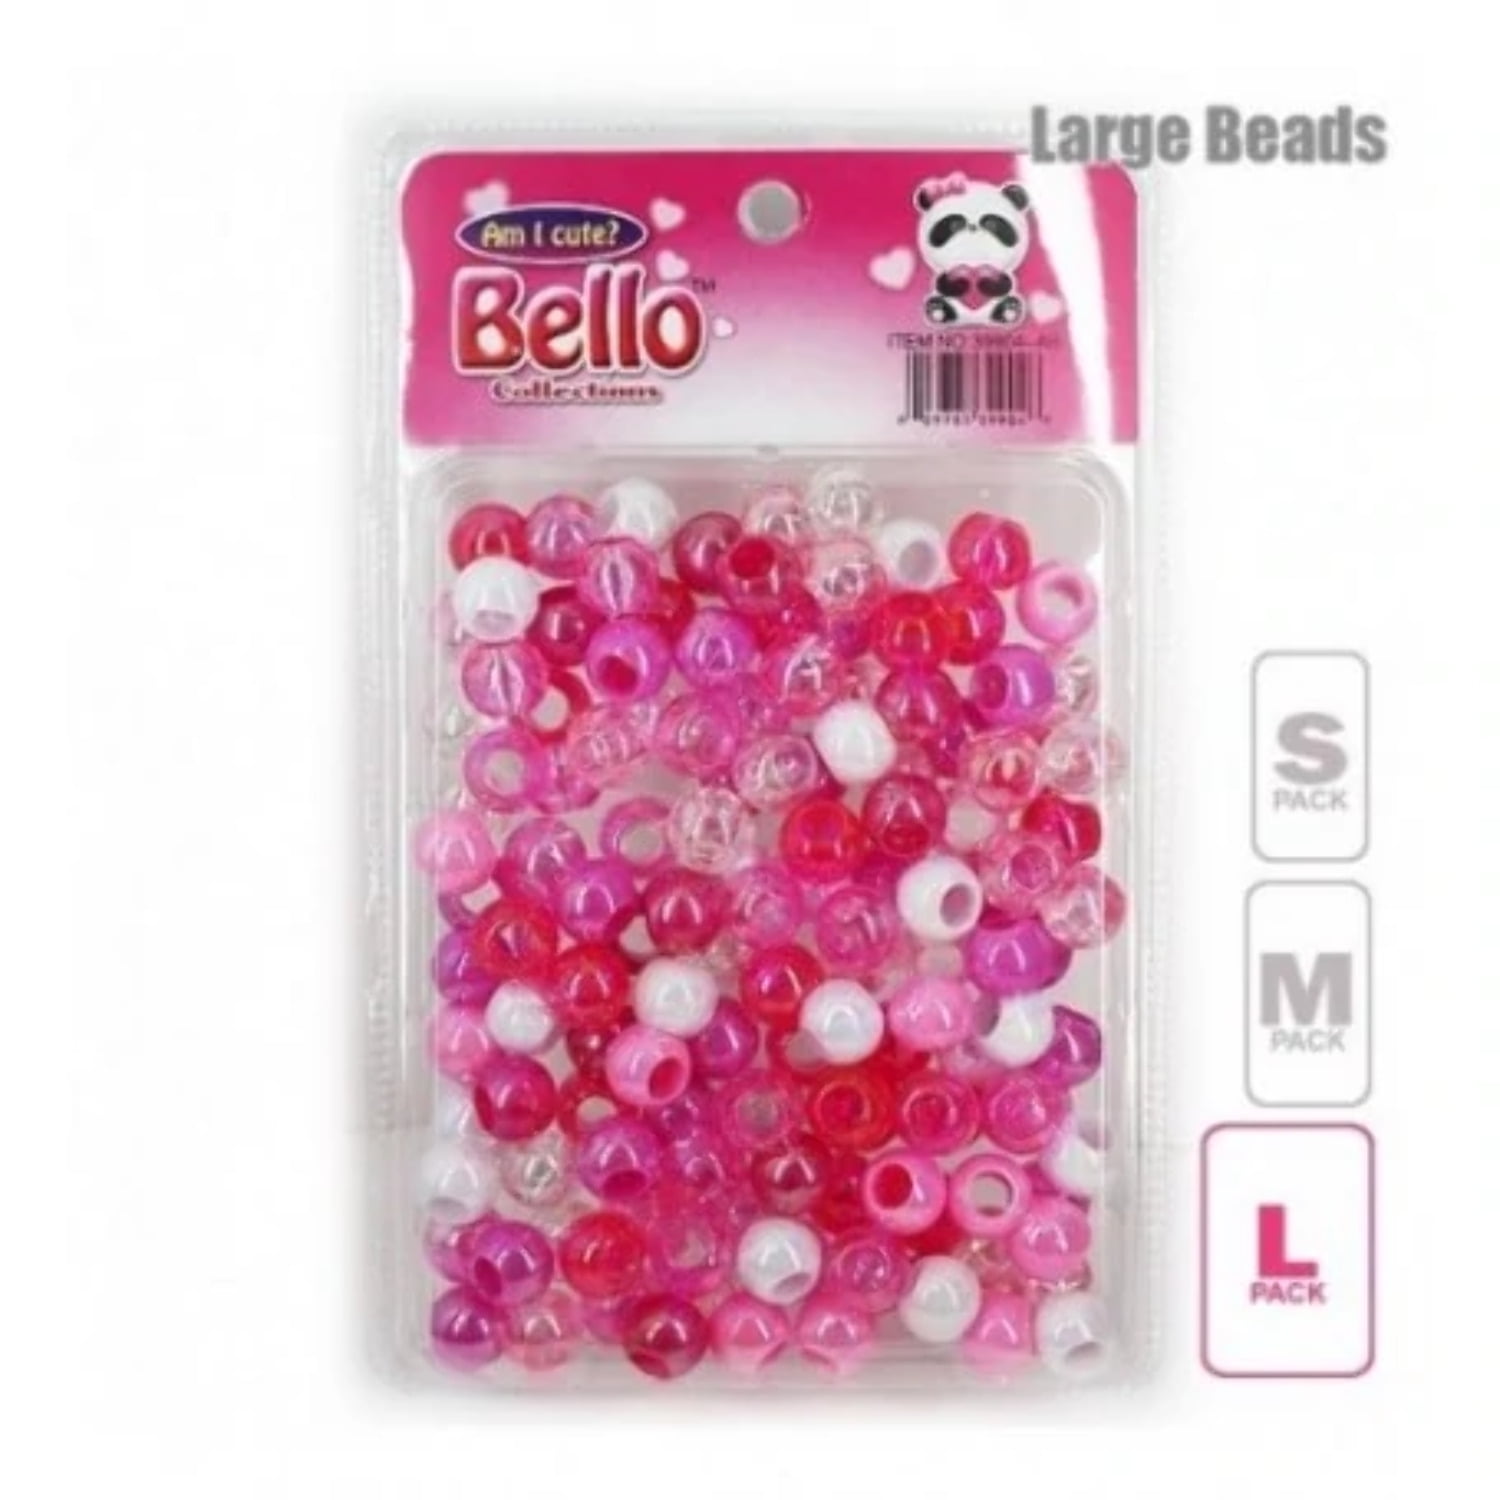 Bello Collection Jumbo Hair Beads-Clear/Gold #39900G